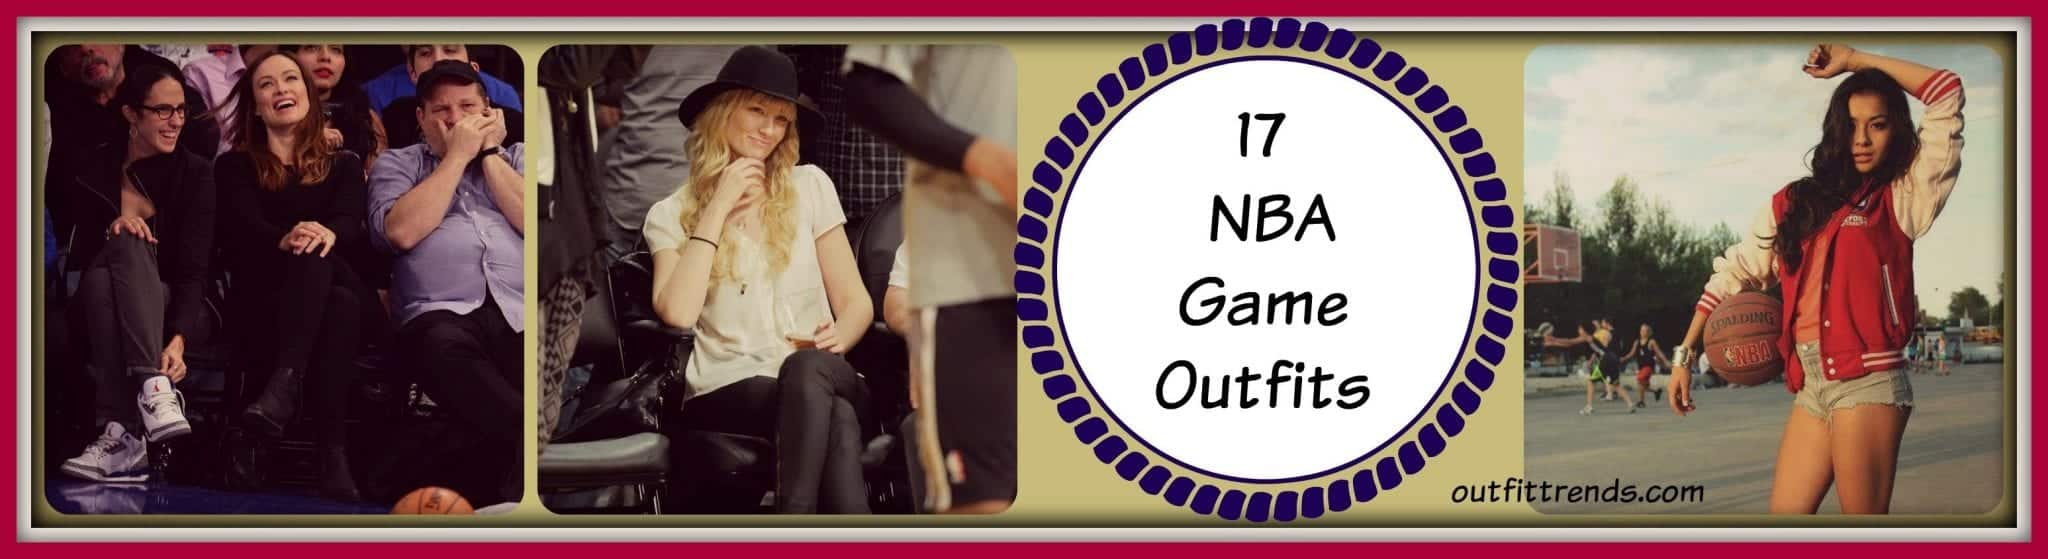 What to Wear Basket Ball Game? 17 Outfits for NBA Game